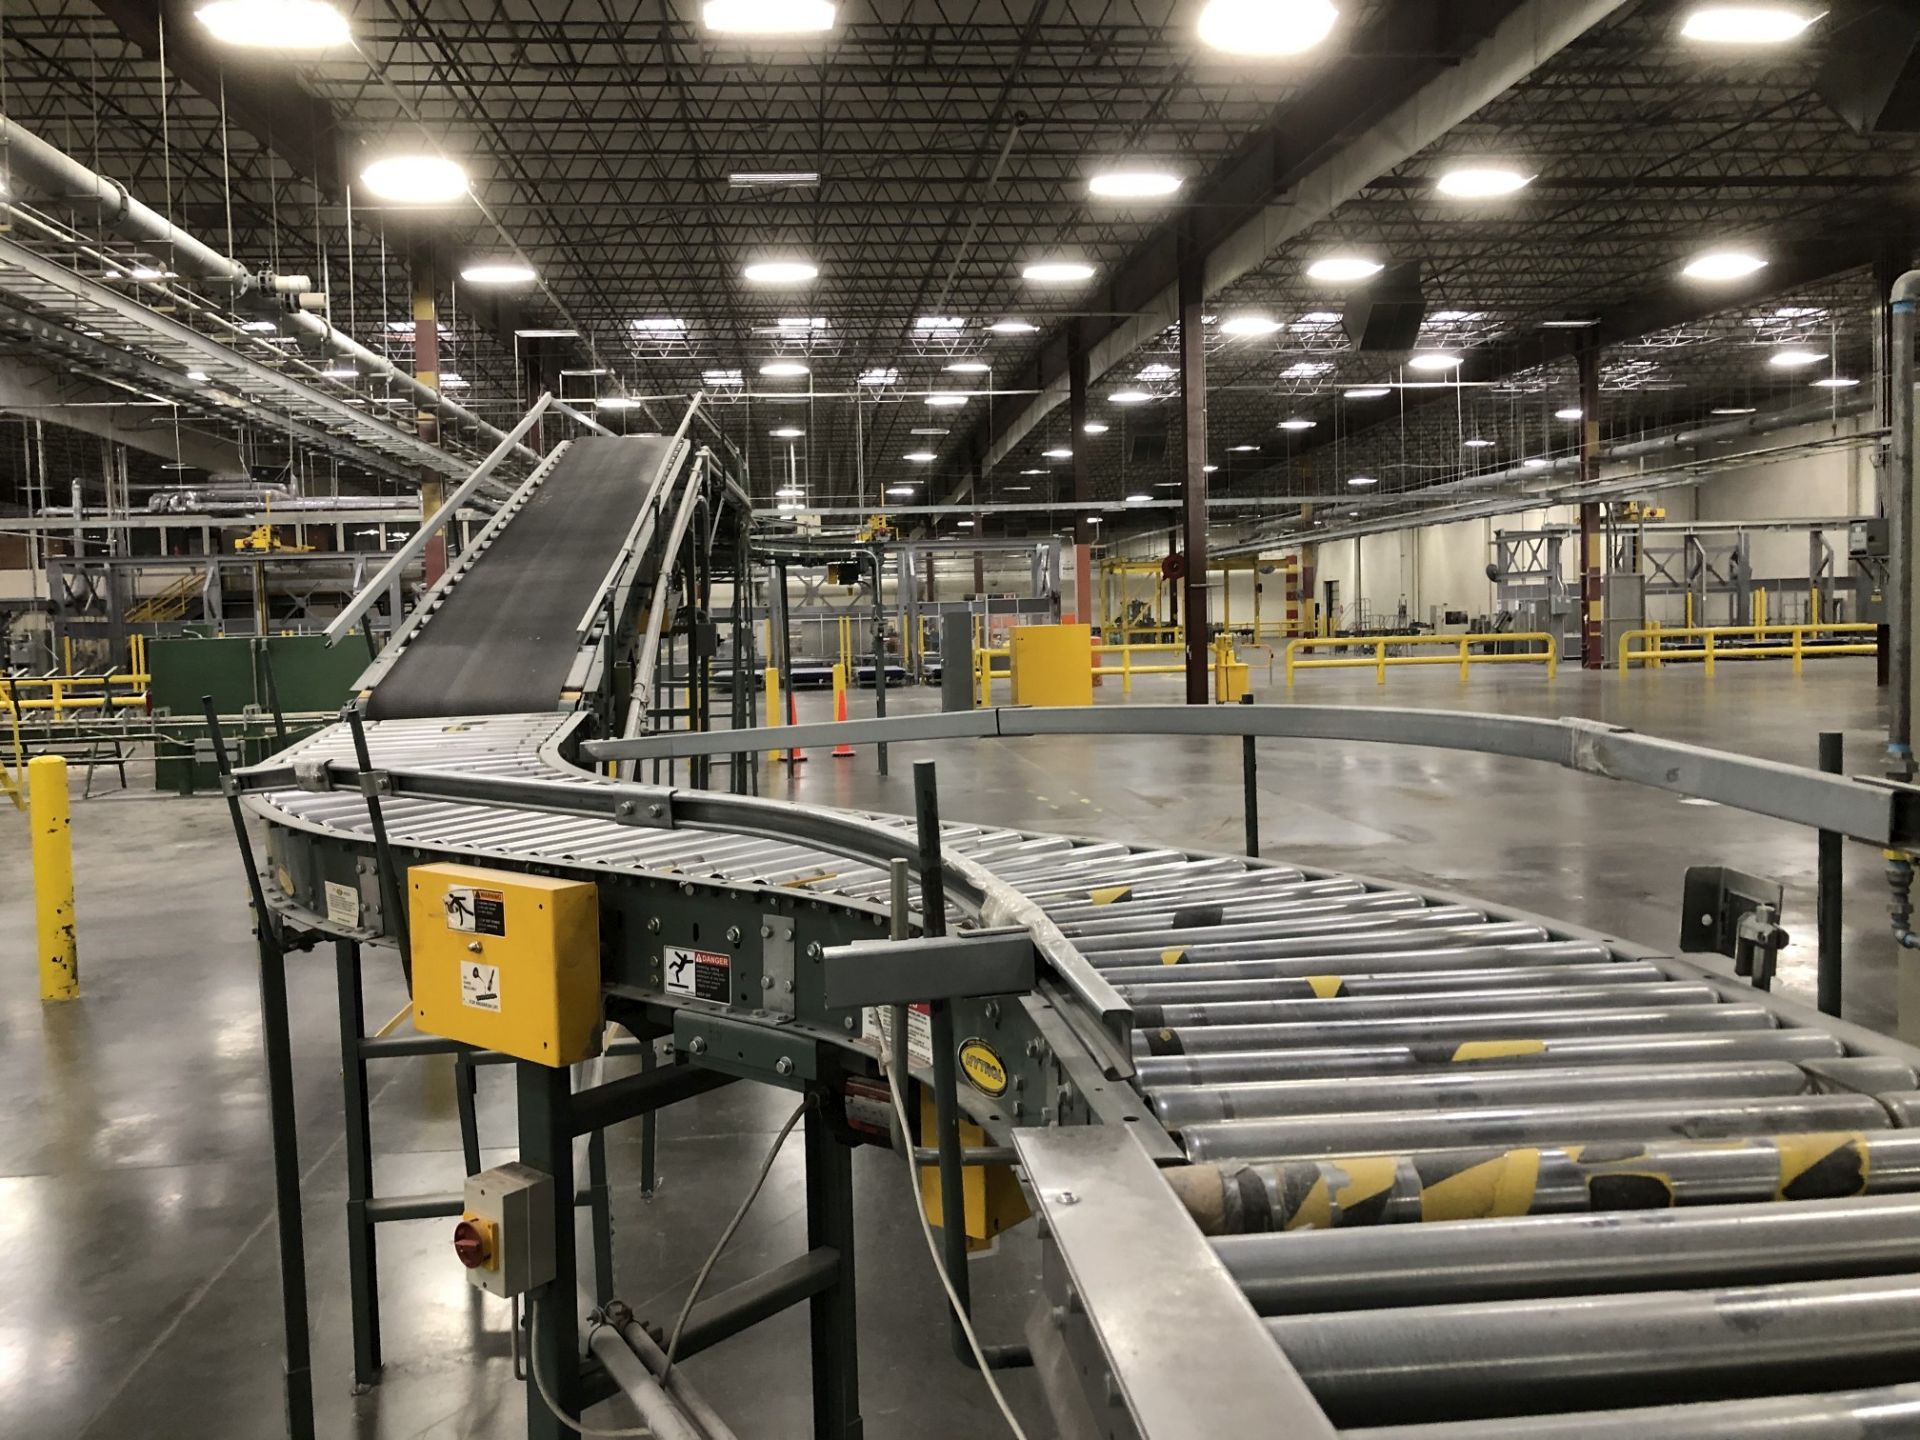 All Hytrol Conveyor Throughout Entire Site, Mostly 20" Wide Powered Roller Conveyor [Please - Image 3 of 80